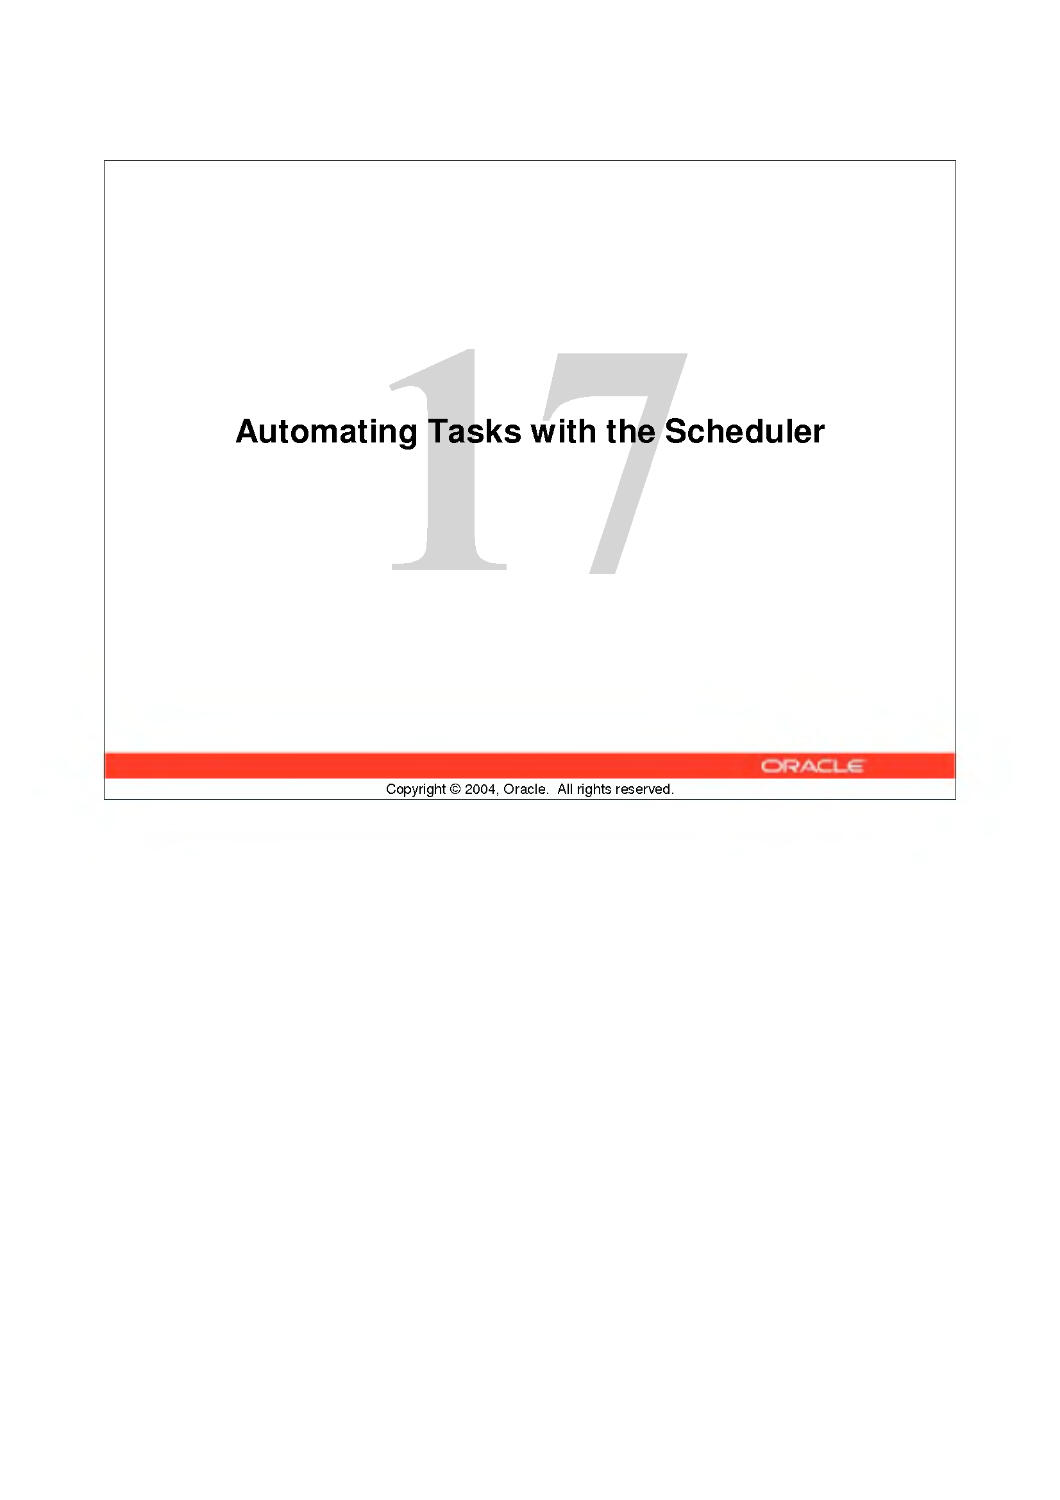 17 Automating Tasks with the Scheduler